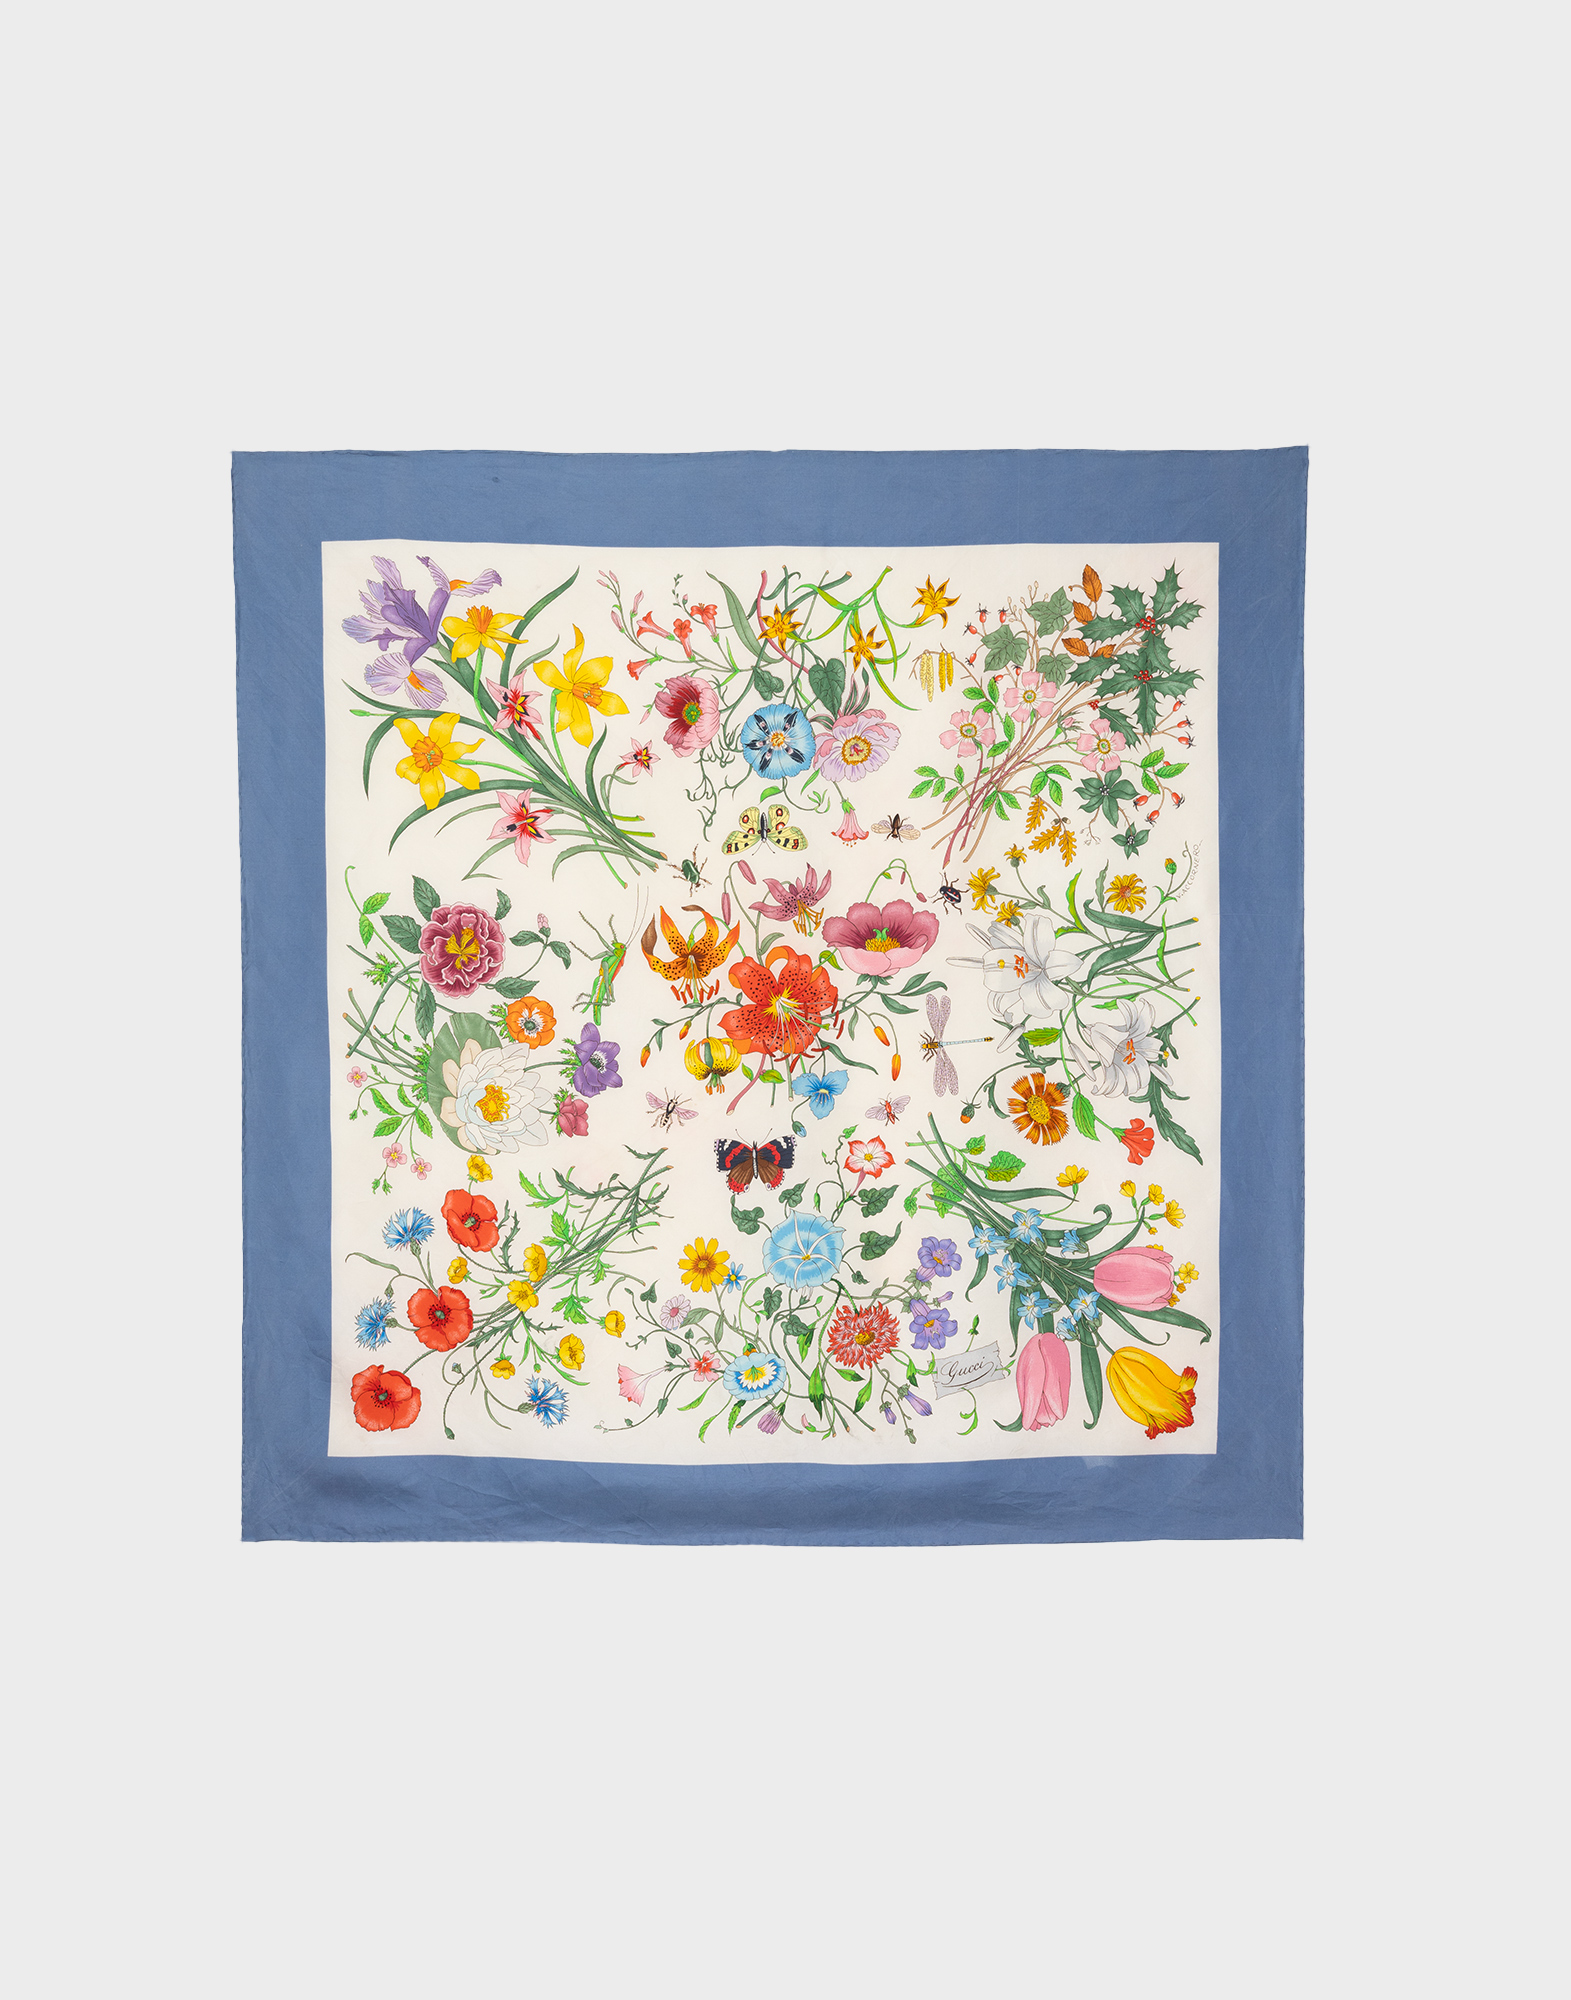 Gucci women's silk scarf with beige background, blue border and floral pattern in the centre